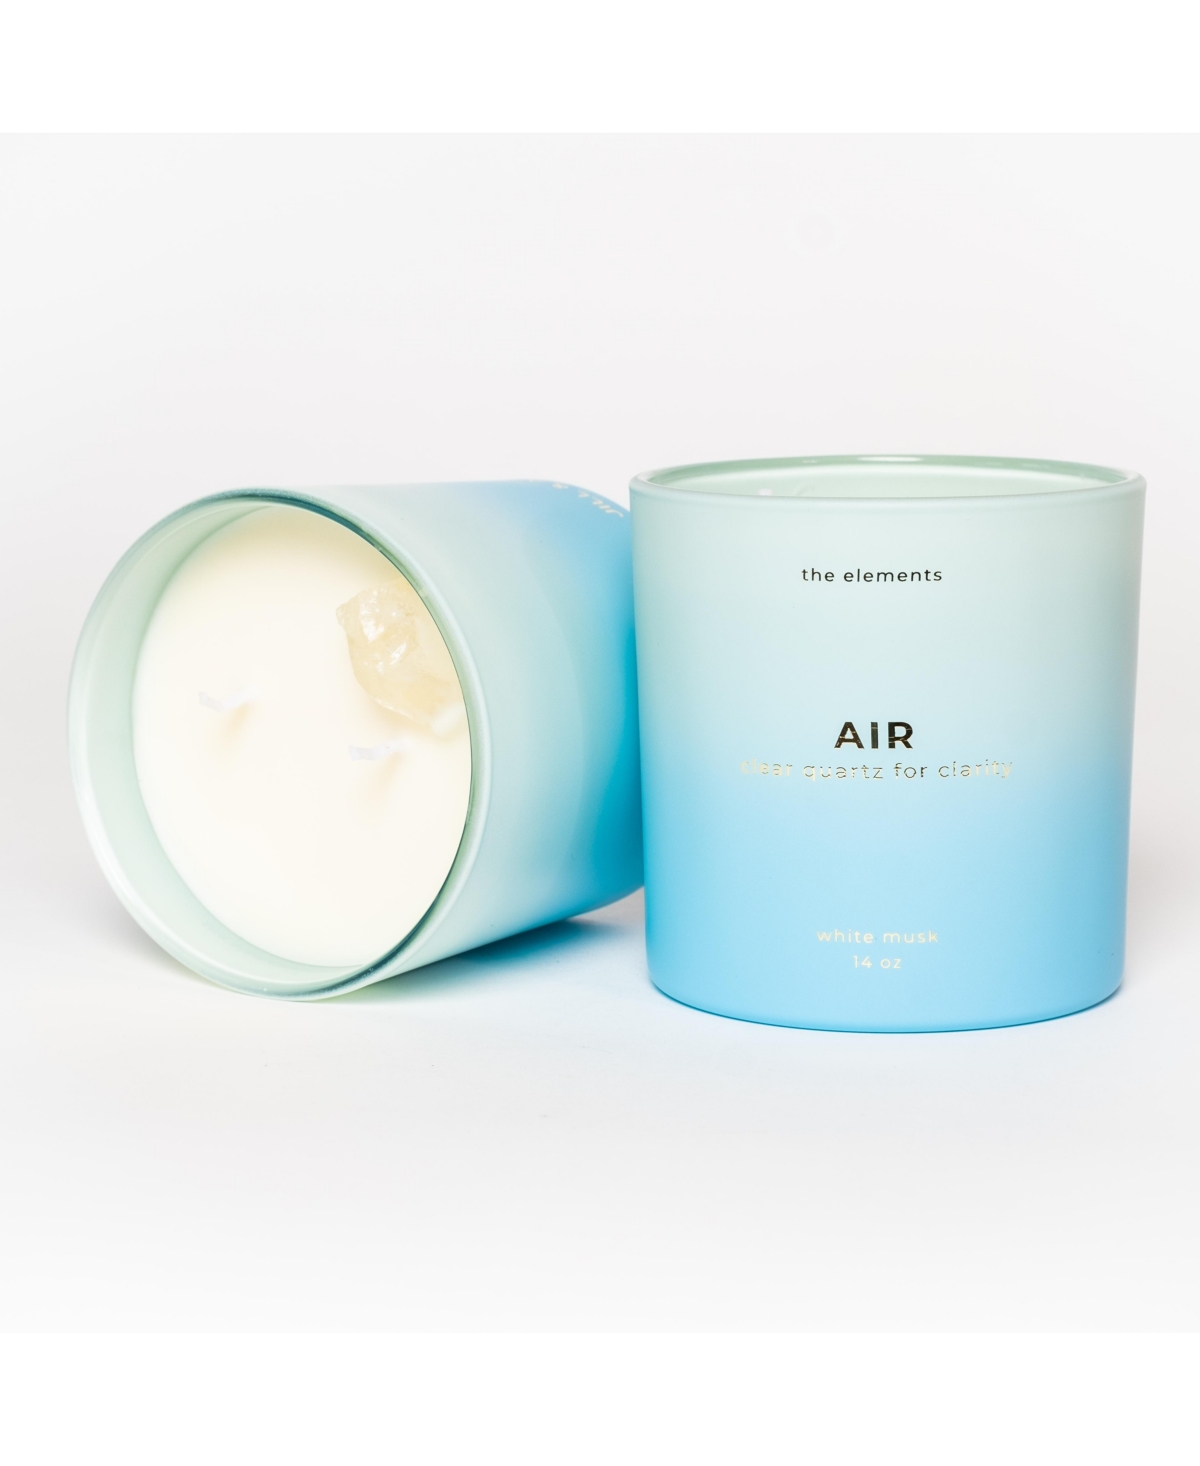 Jill & Ally Air Element White Musk Scented with Clear Quartz Crystal Candle